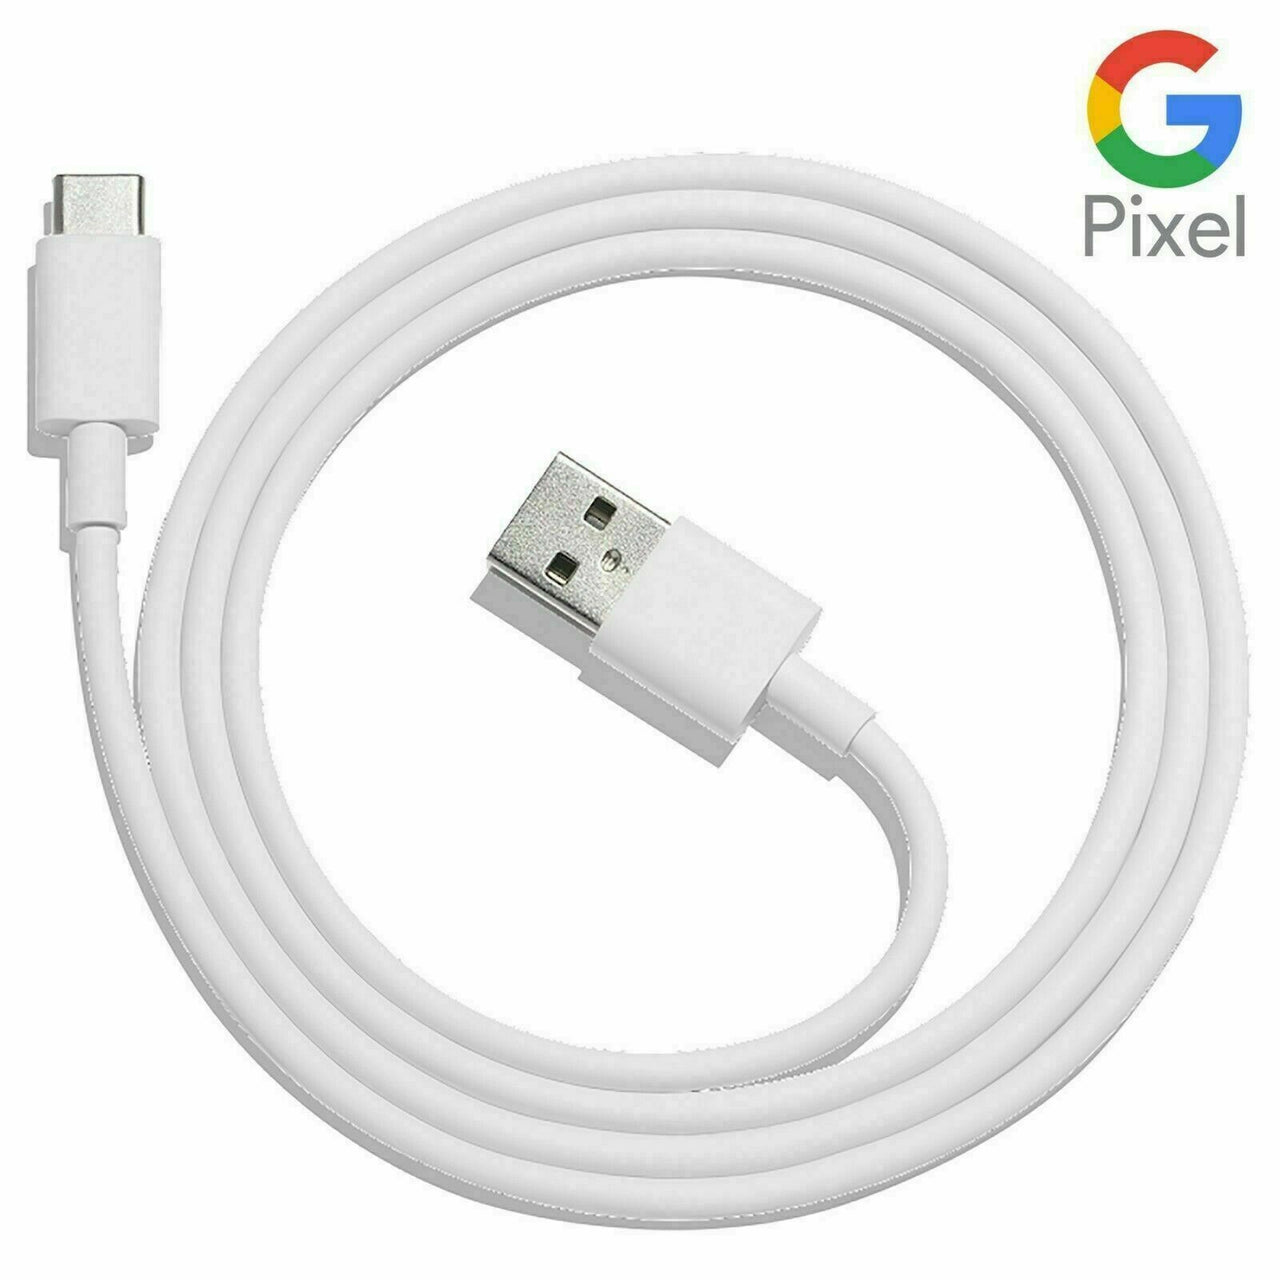 Google USB A to USB-C Cable for PIXEL 7/6/5/4/3 - Data + Charging Cable